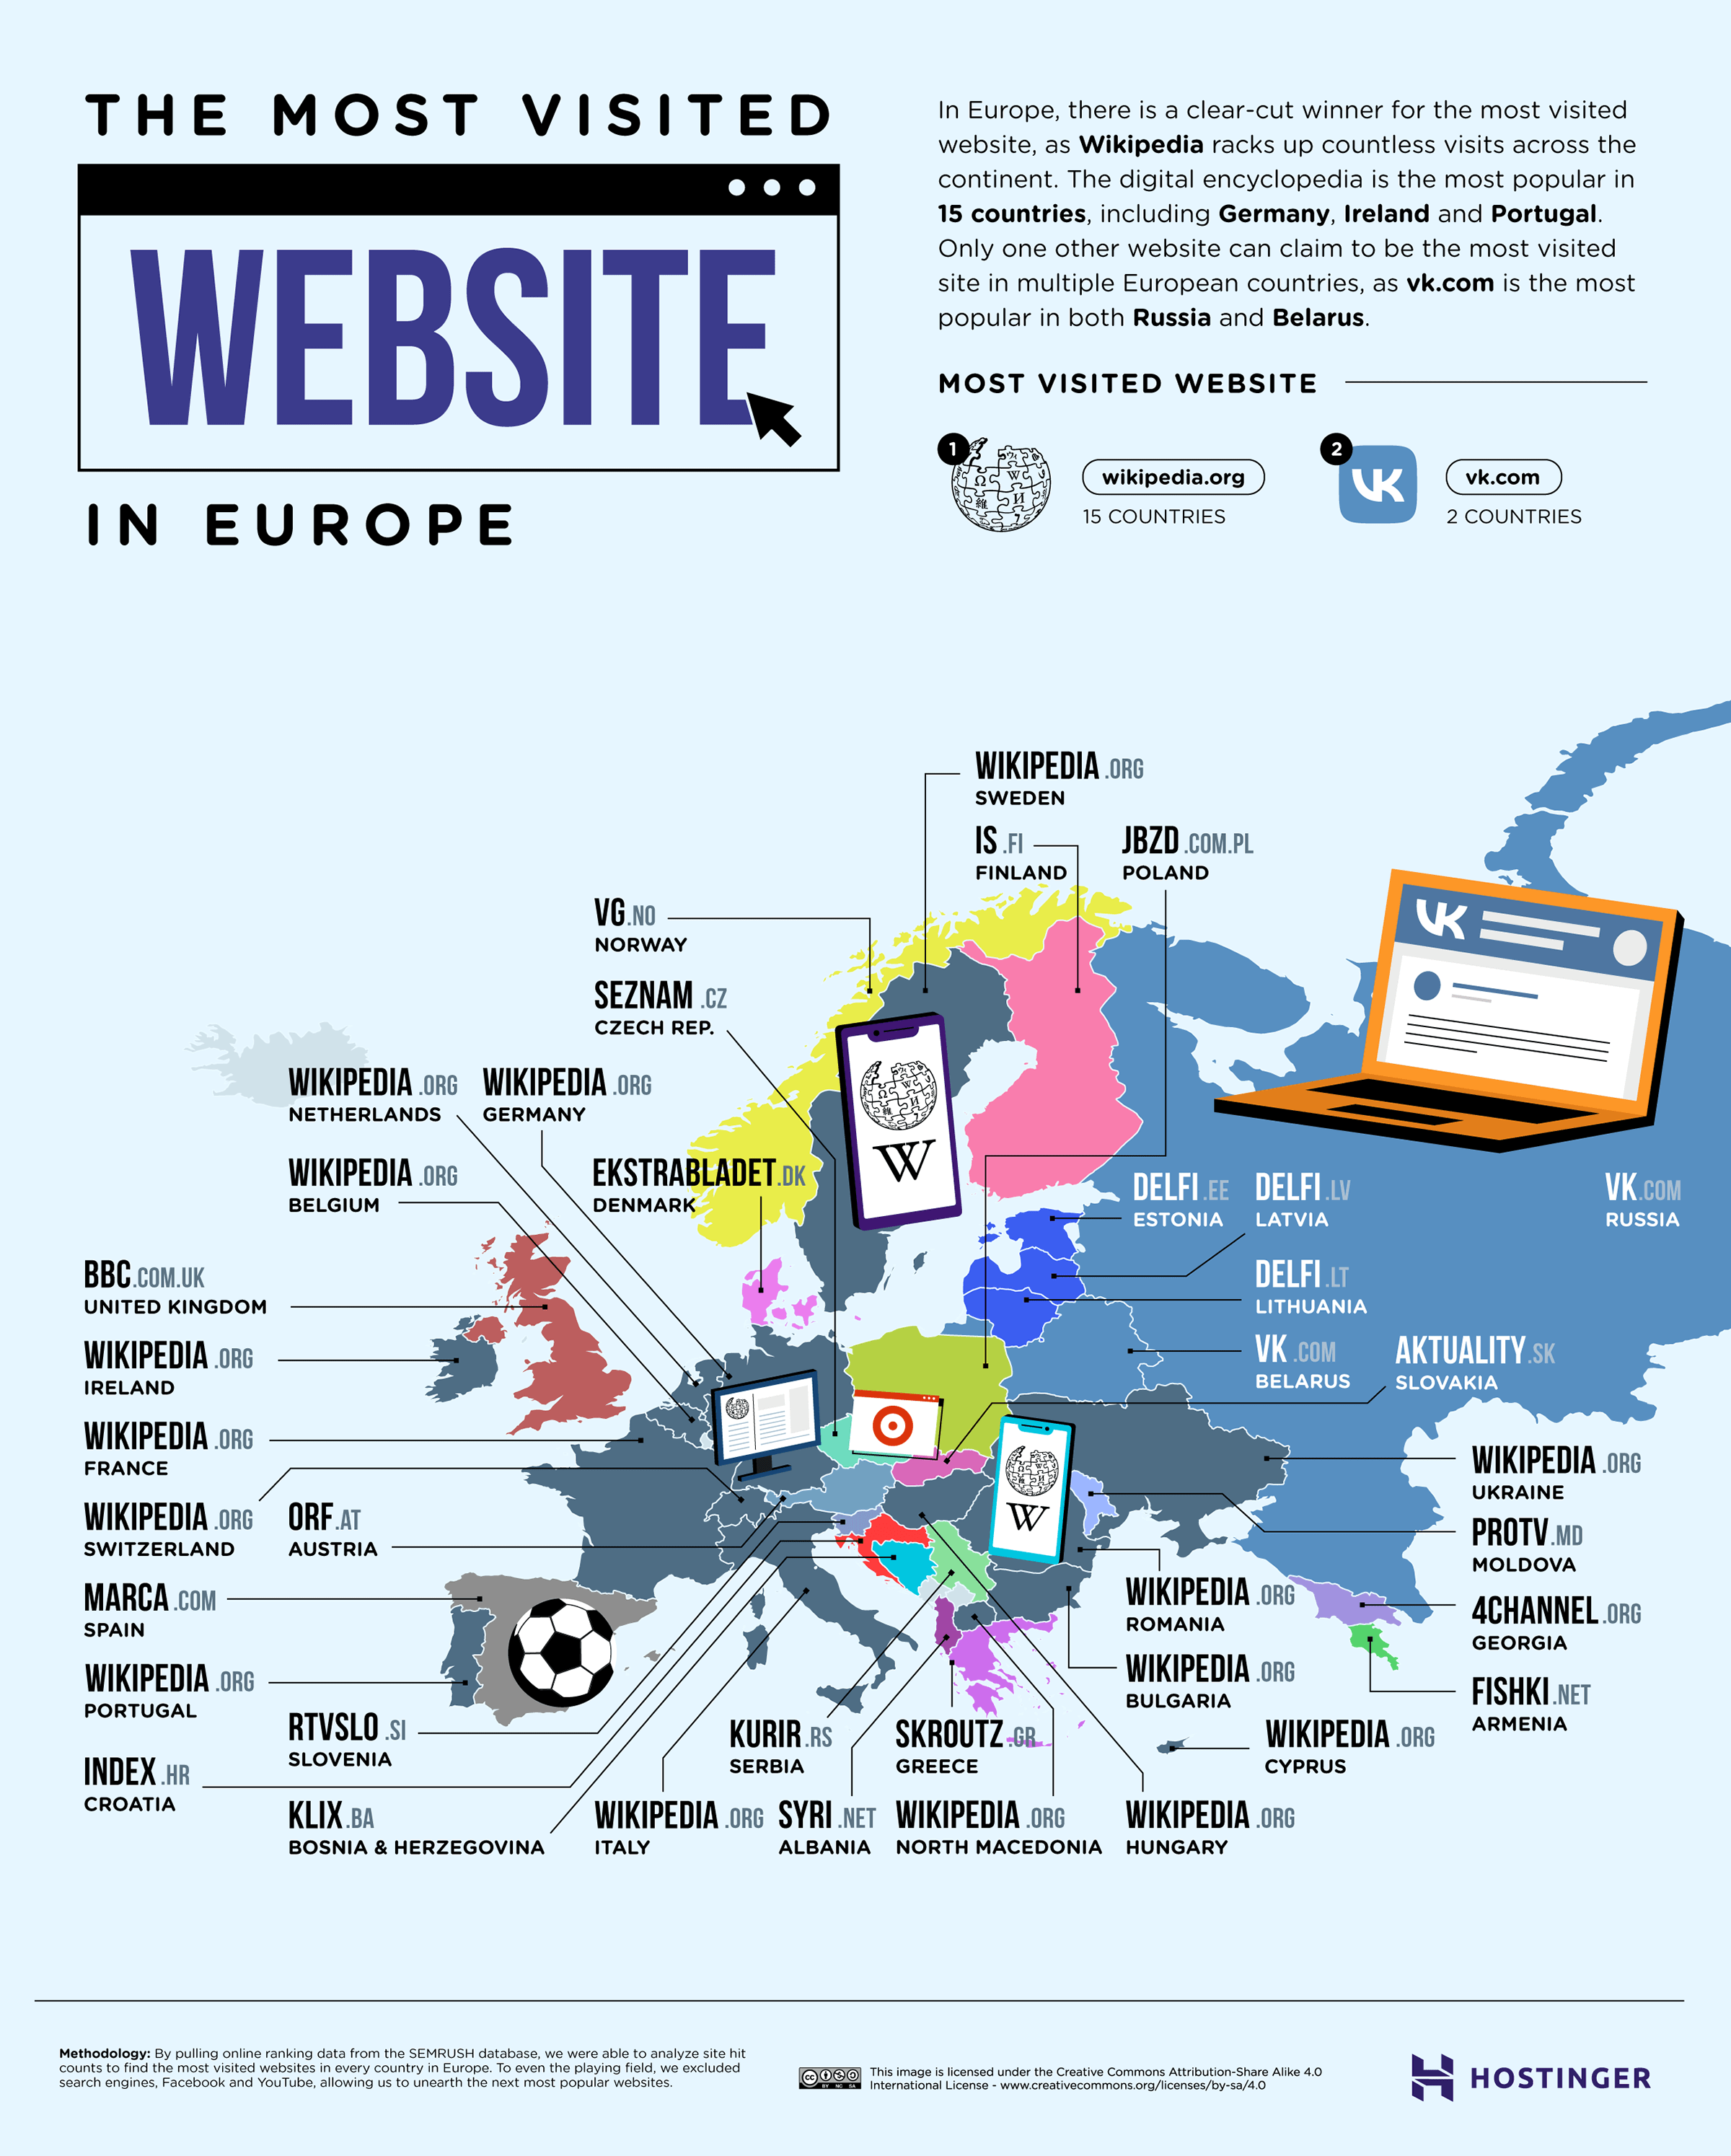 https://www.moneyreview.gr/wp-content/uploads/2022/10/04_The-Most-Visited-Website-in-Every-Country_Europe_Hi-RES-1.png?1665466645185